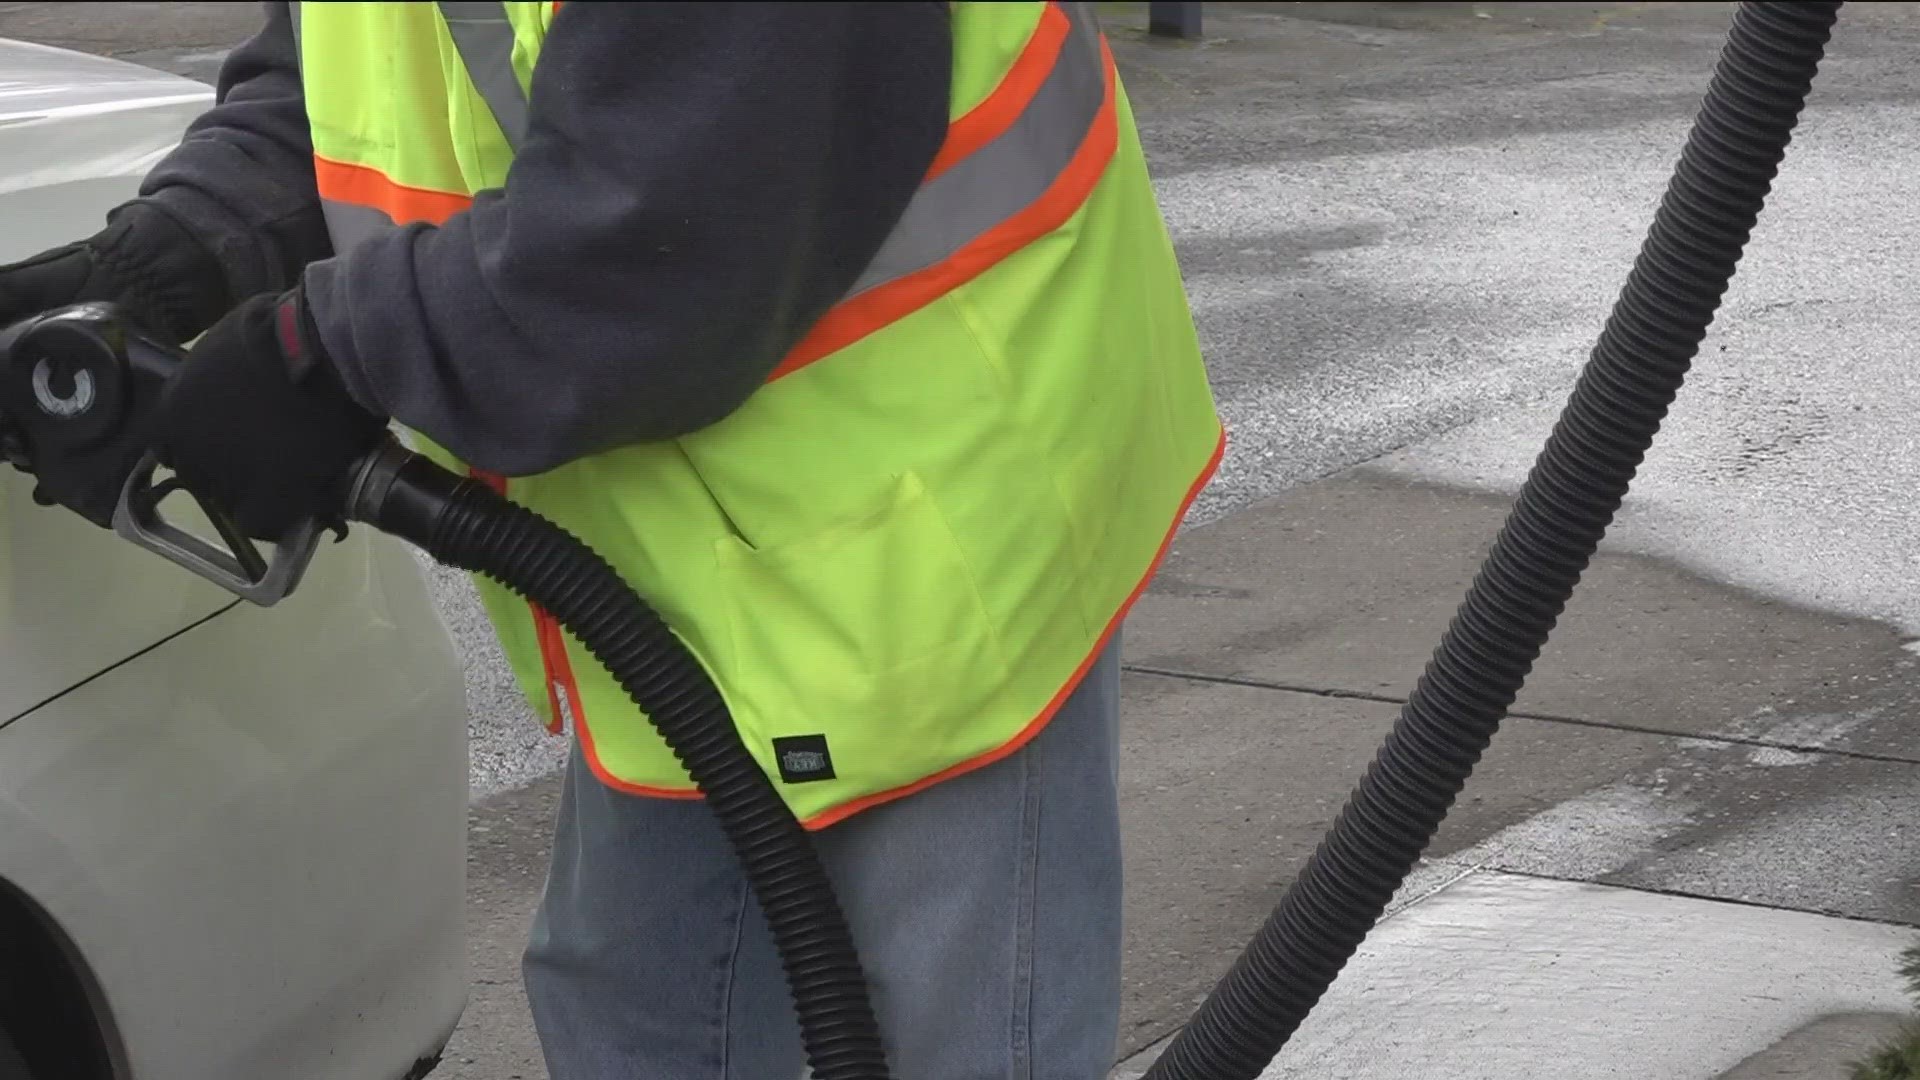 House Bill 2426 will give Oregonians a choice to pump their own gas or have an attendant do it.